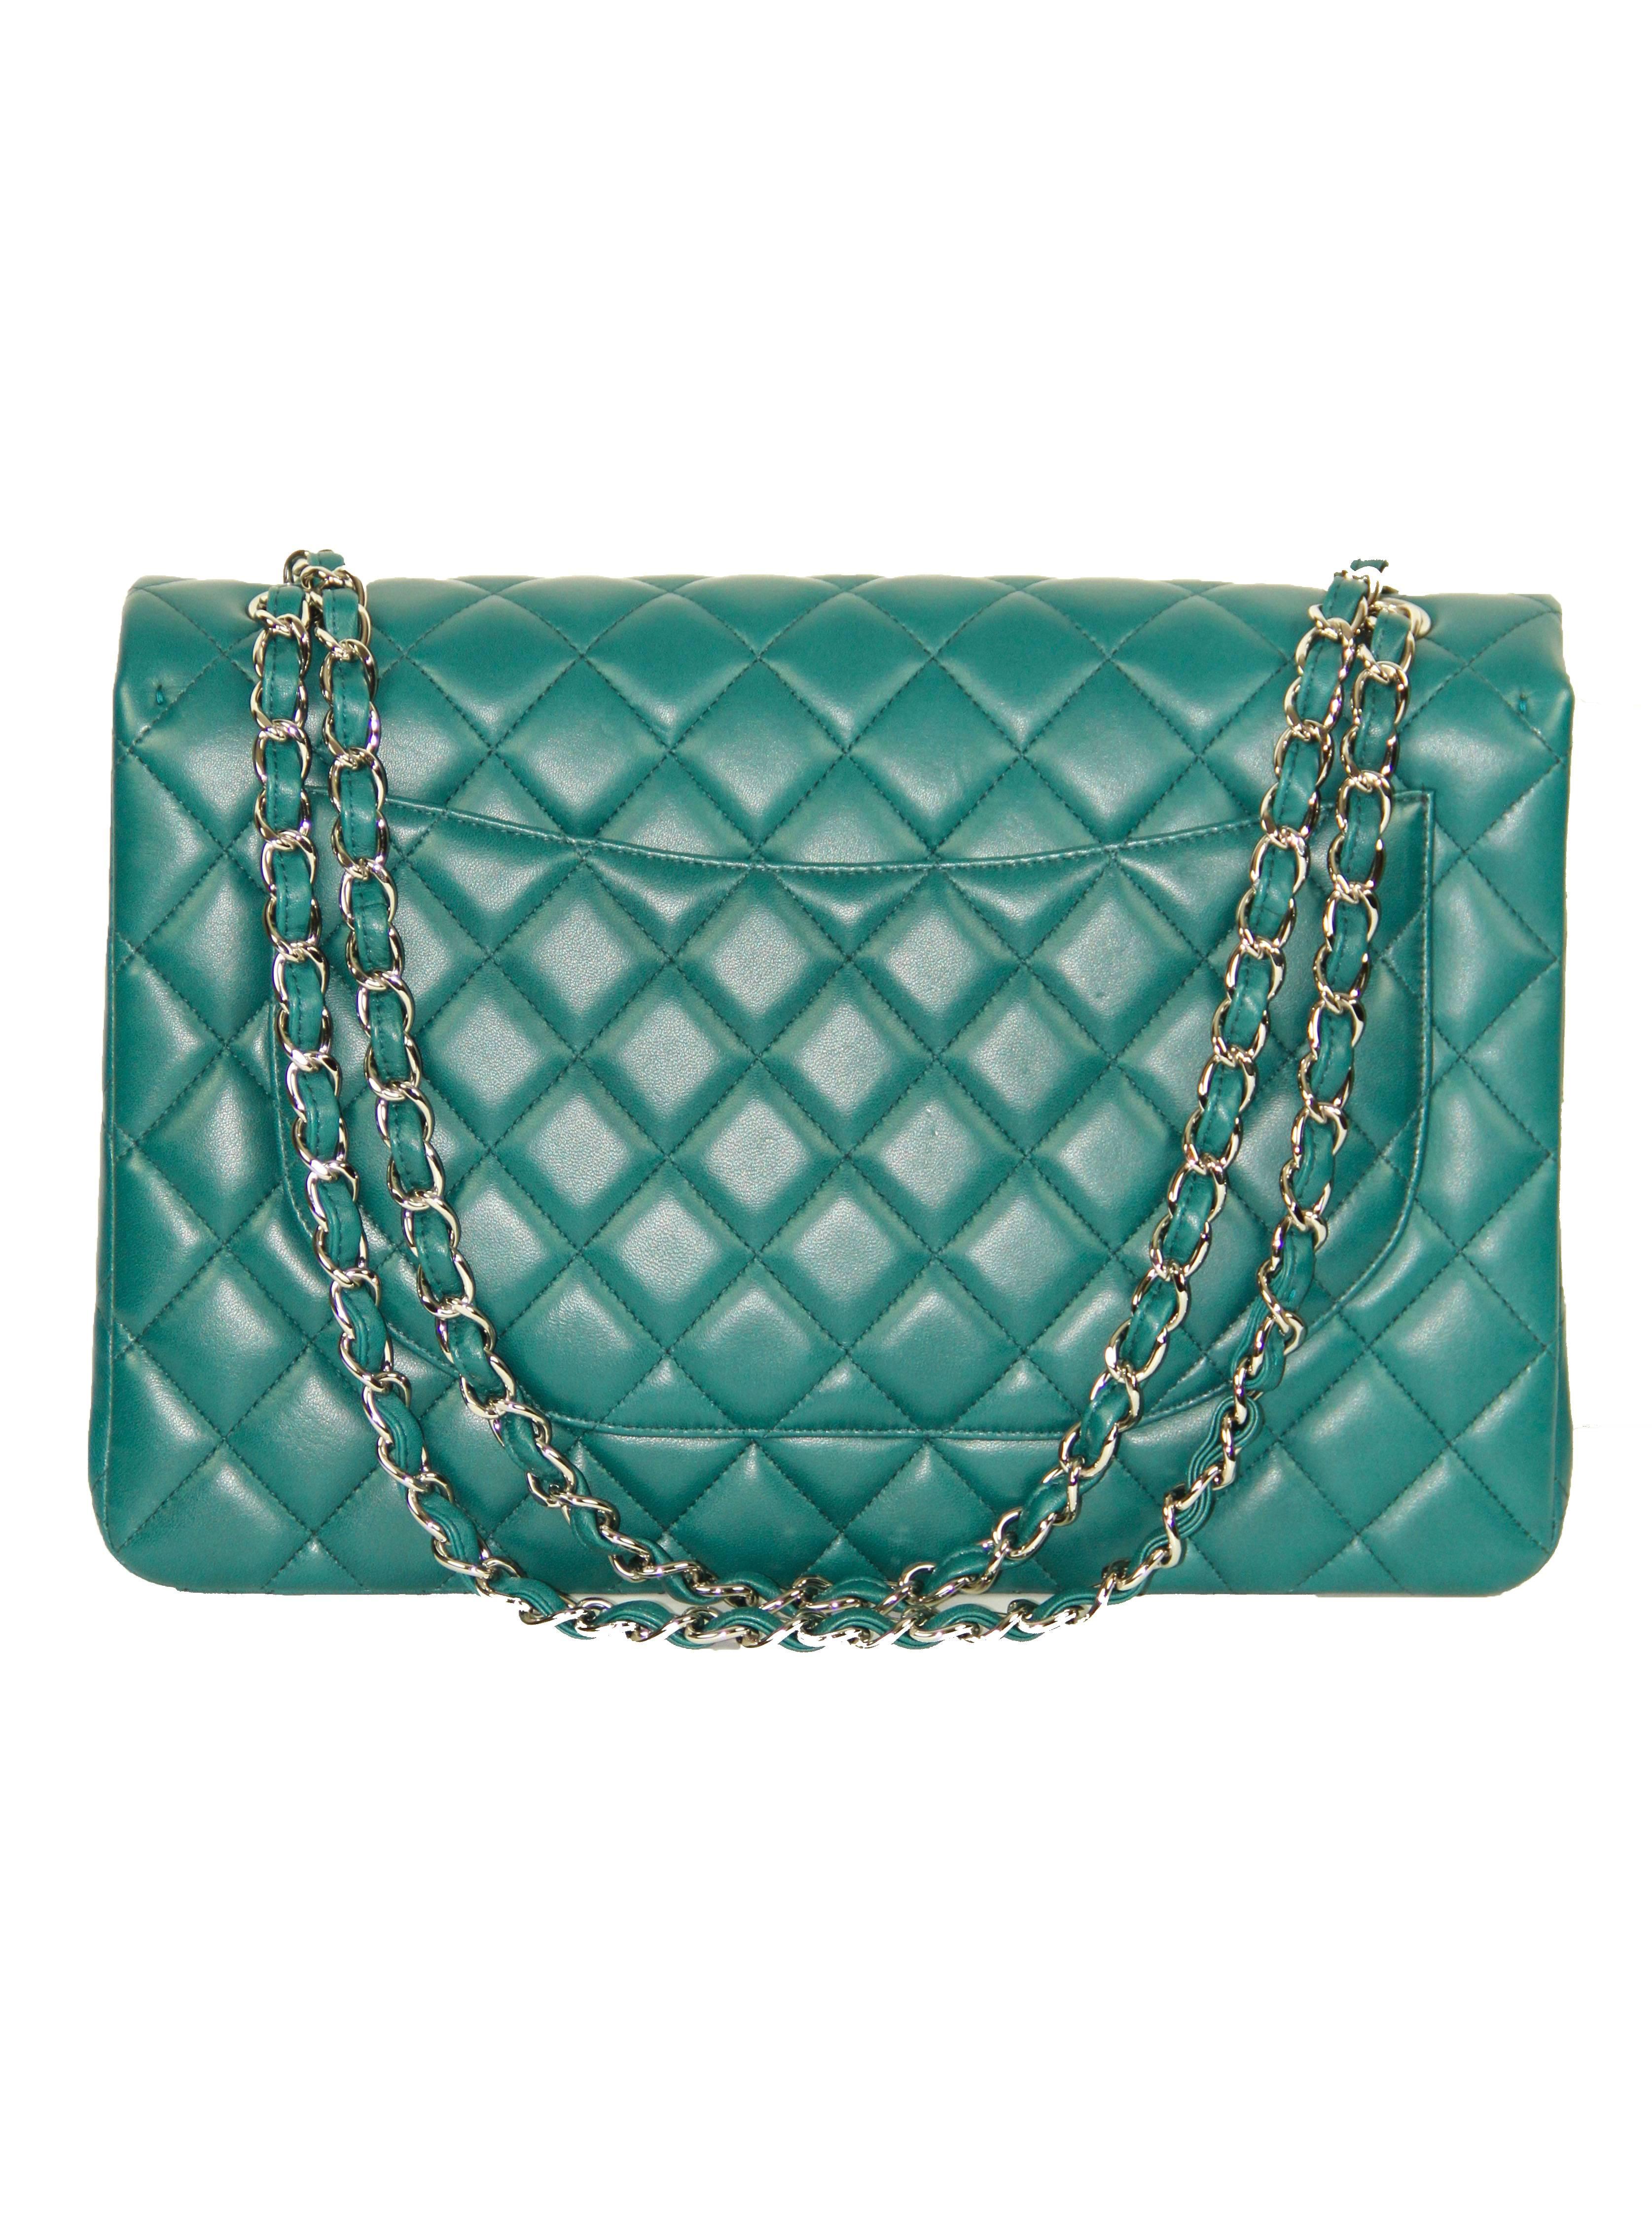 Perfect condition for this Timeless flap bag from Chanel featuring an amazing color. 

Year: 2010
Material: Quilted leather
Color: Turquoise blue
Hardware: Silver-tone
Measurements: L 32 cm x H 21 cm x D 9 cm
Condition: Excellent like new
Serial